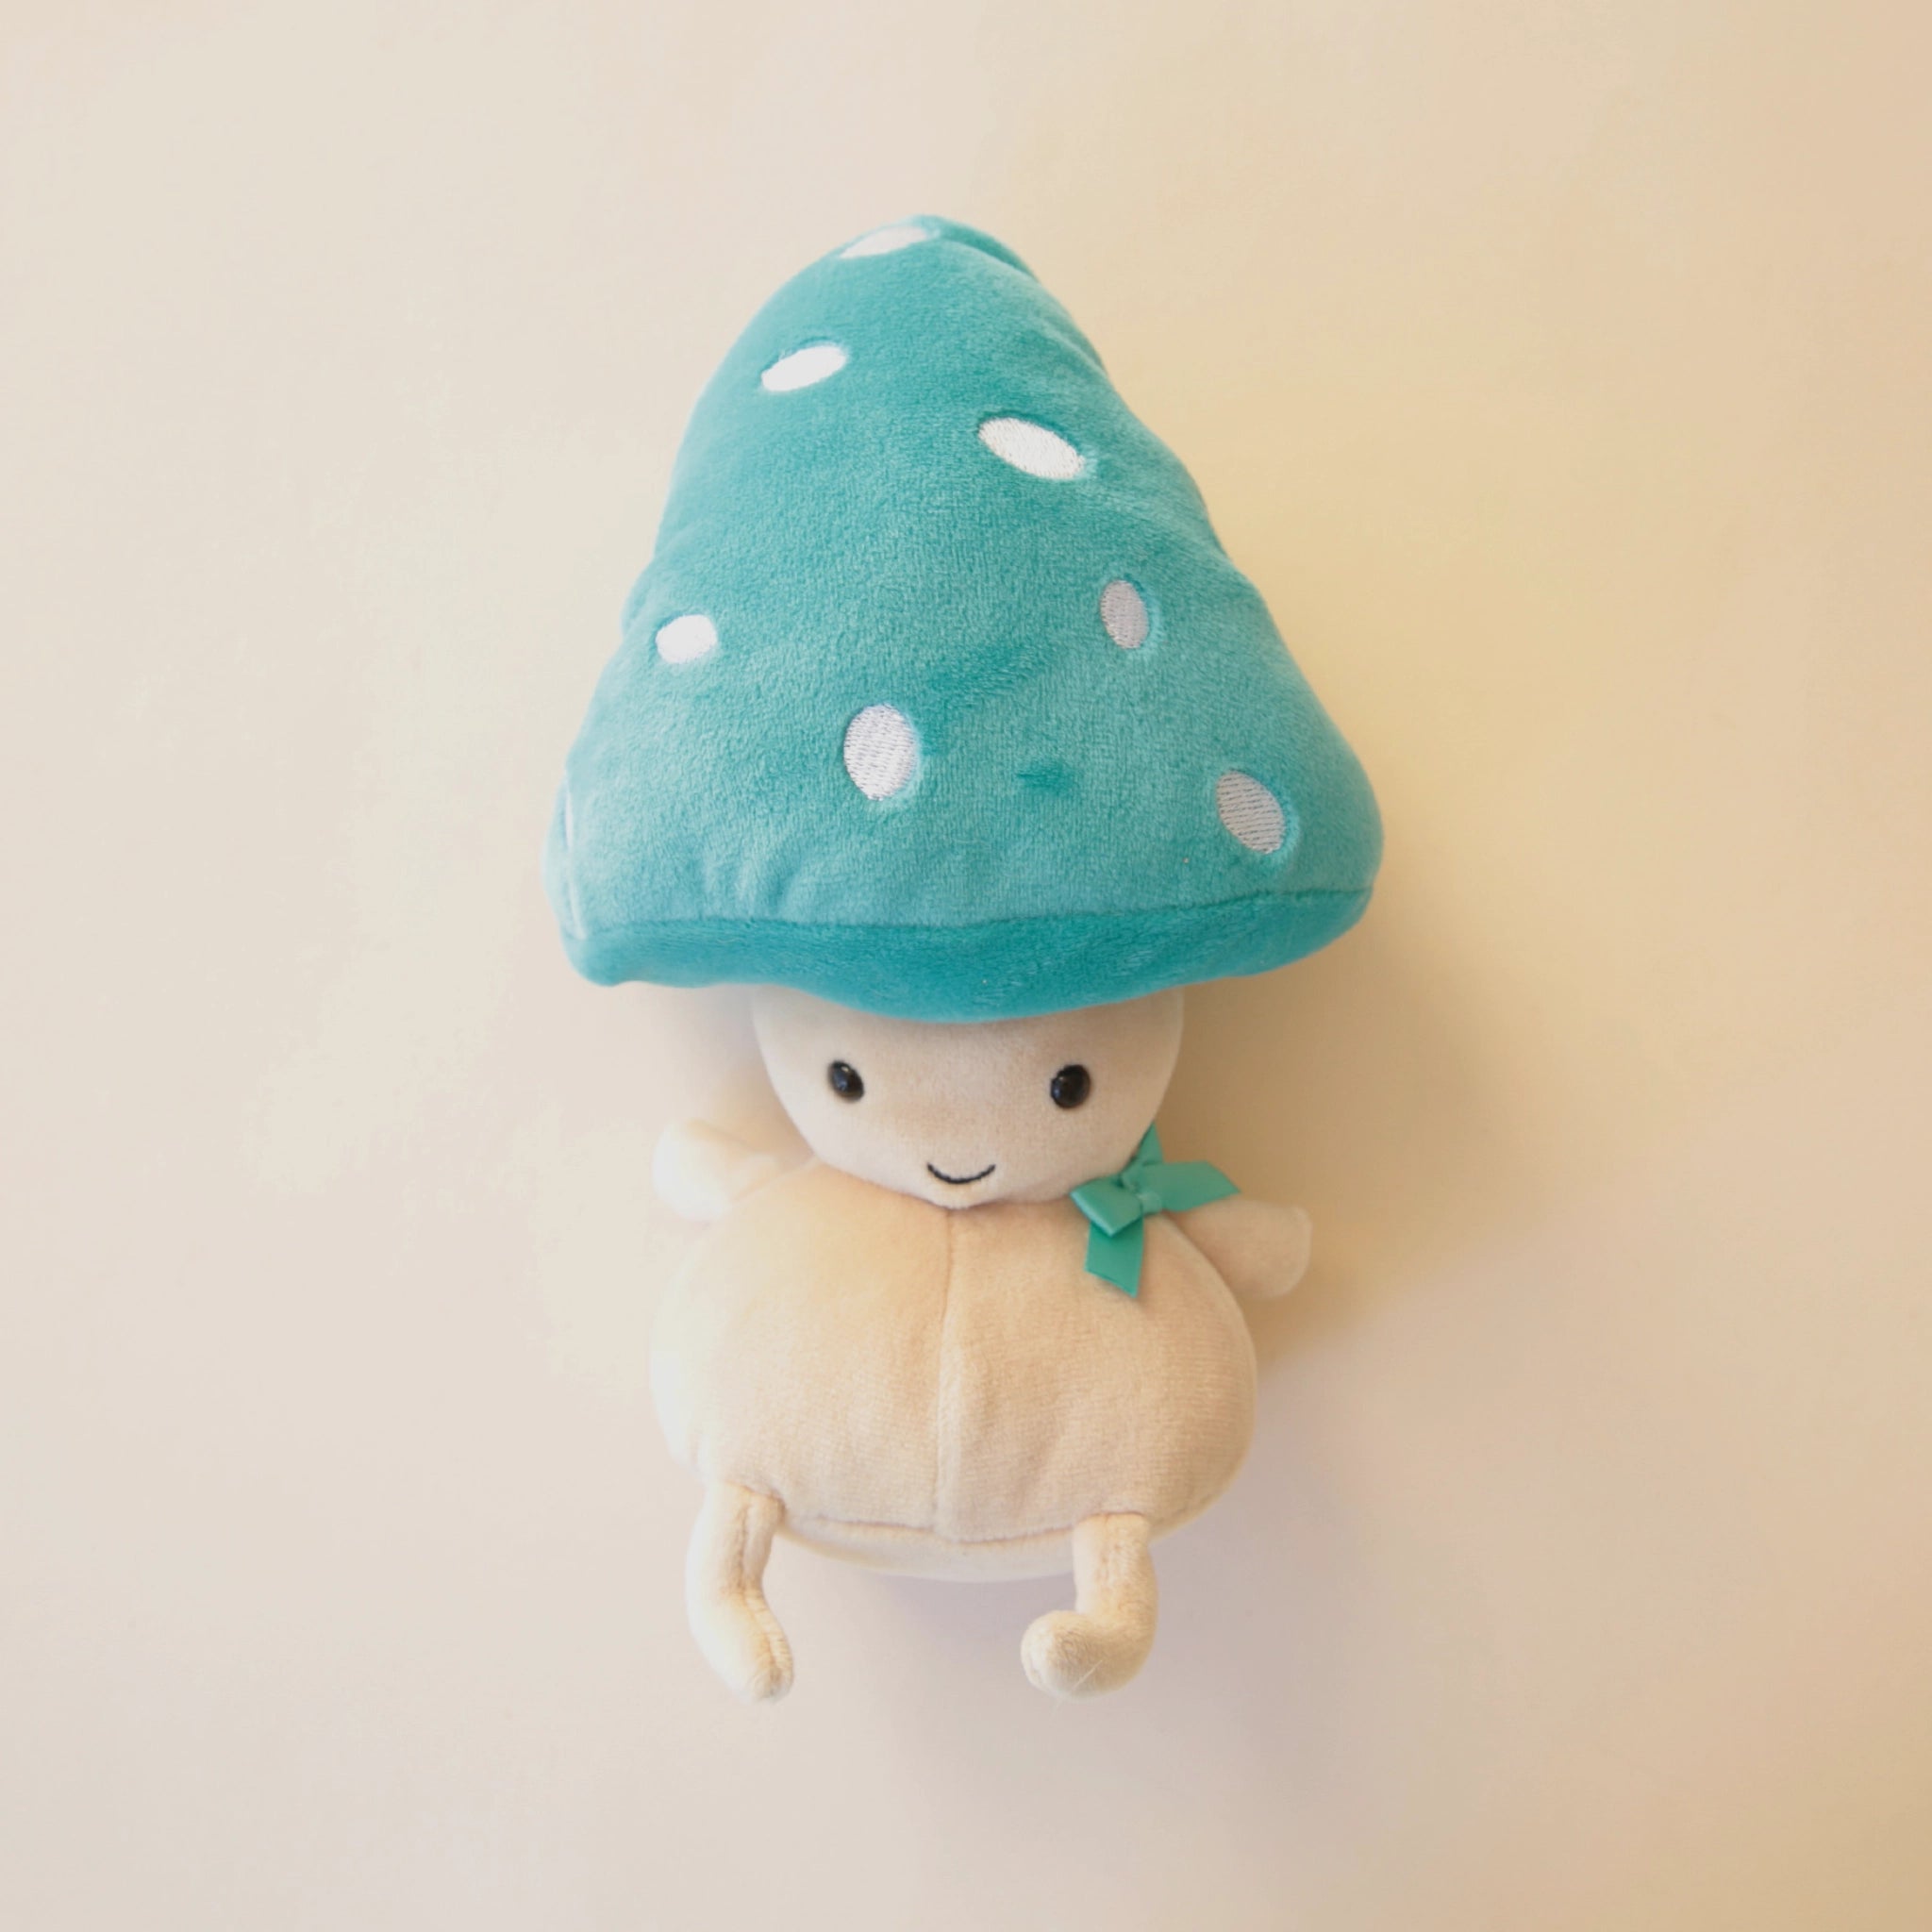 A oatmeal colored mushroom character with black eyes and a small smiling mouth along with a turquoise bowtie and the same colored mushroom hat with white spots.